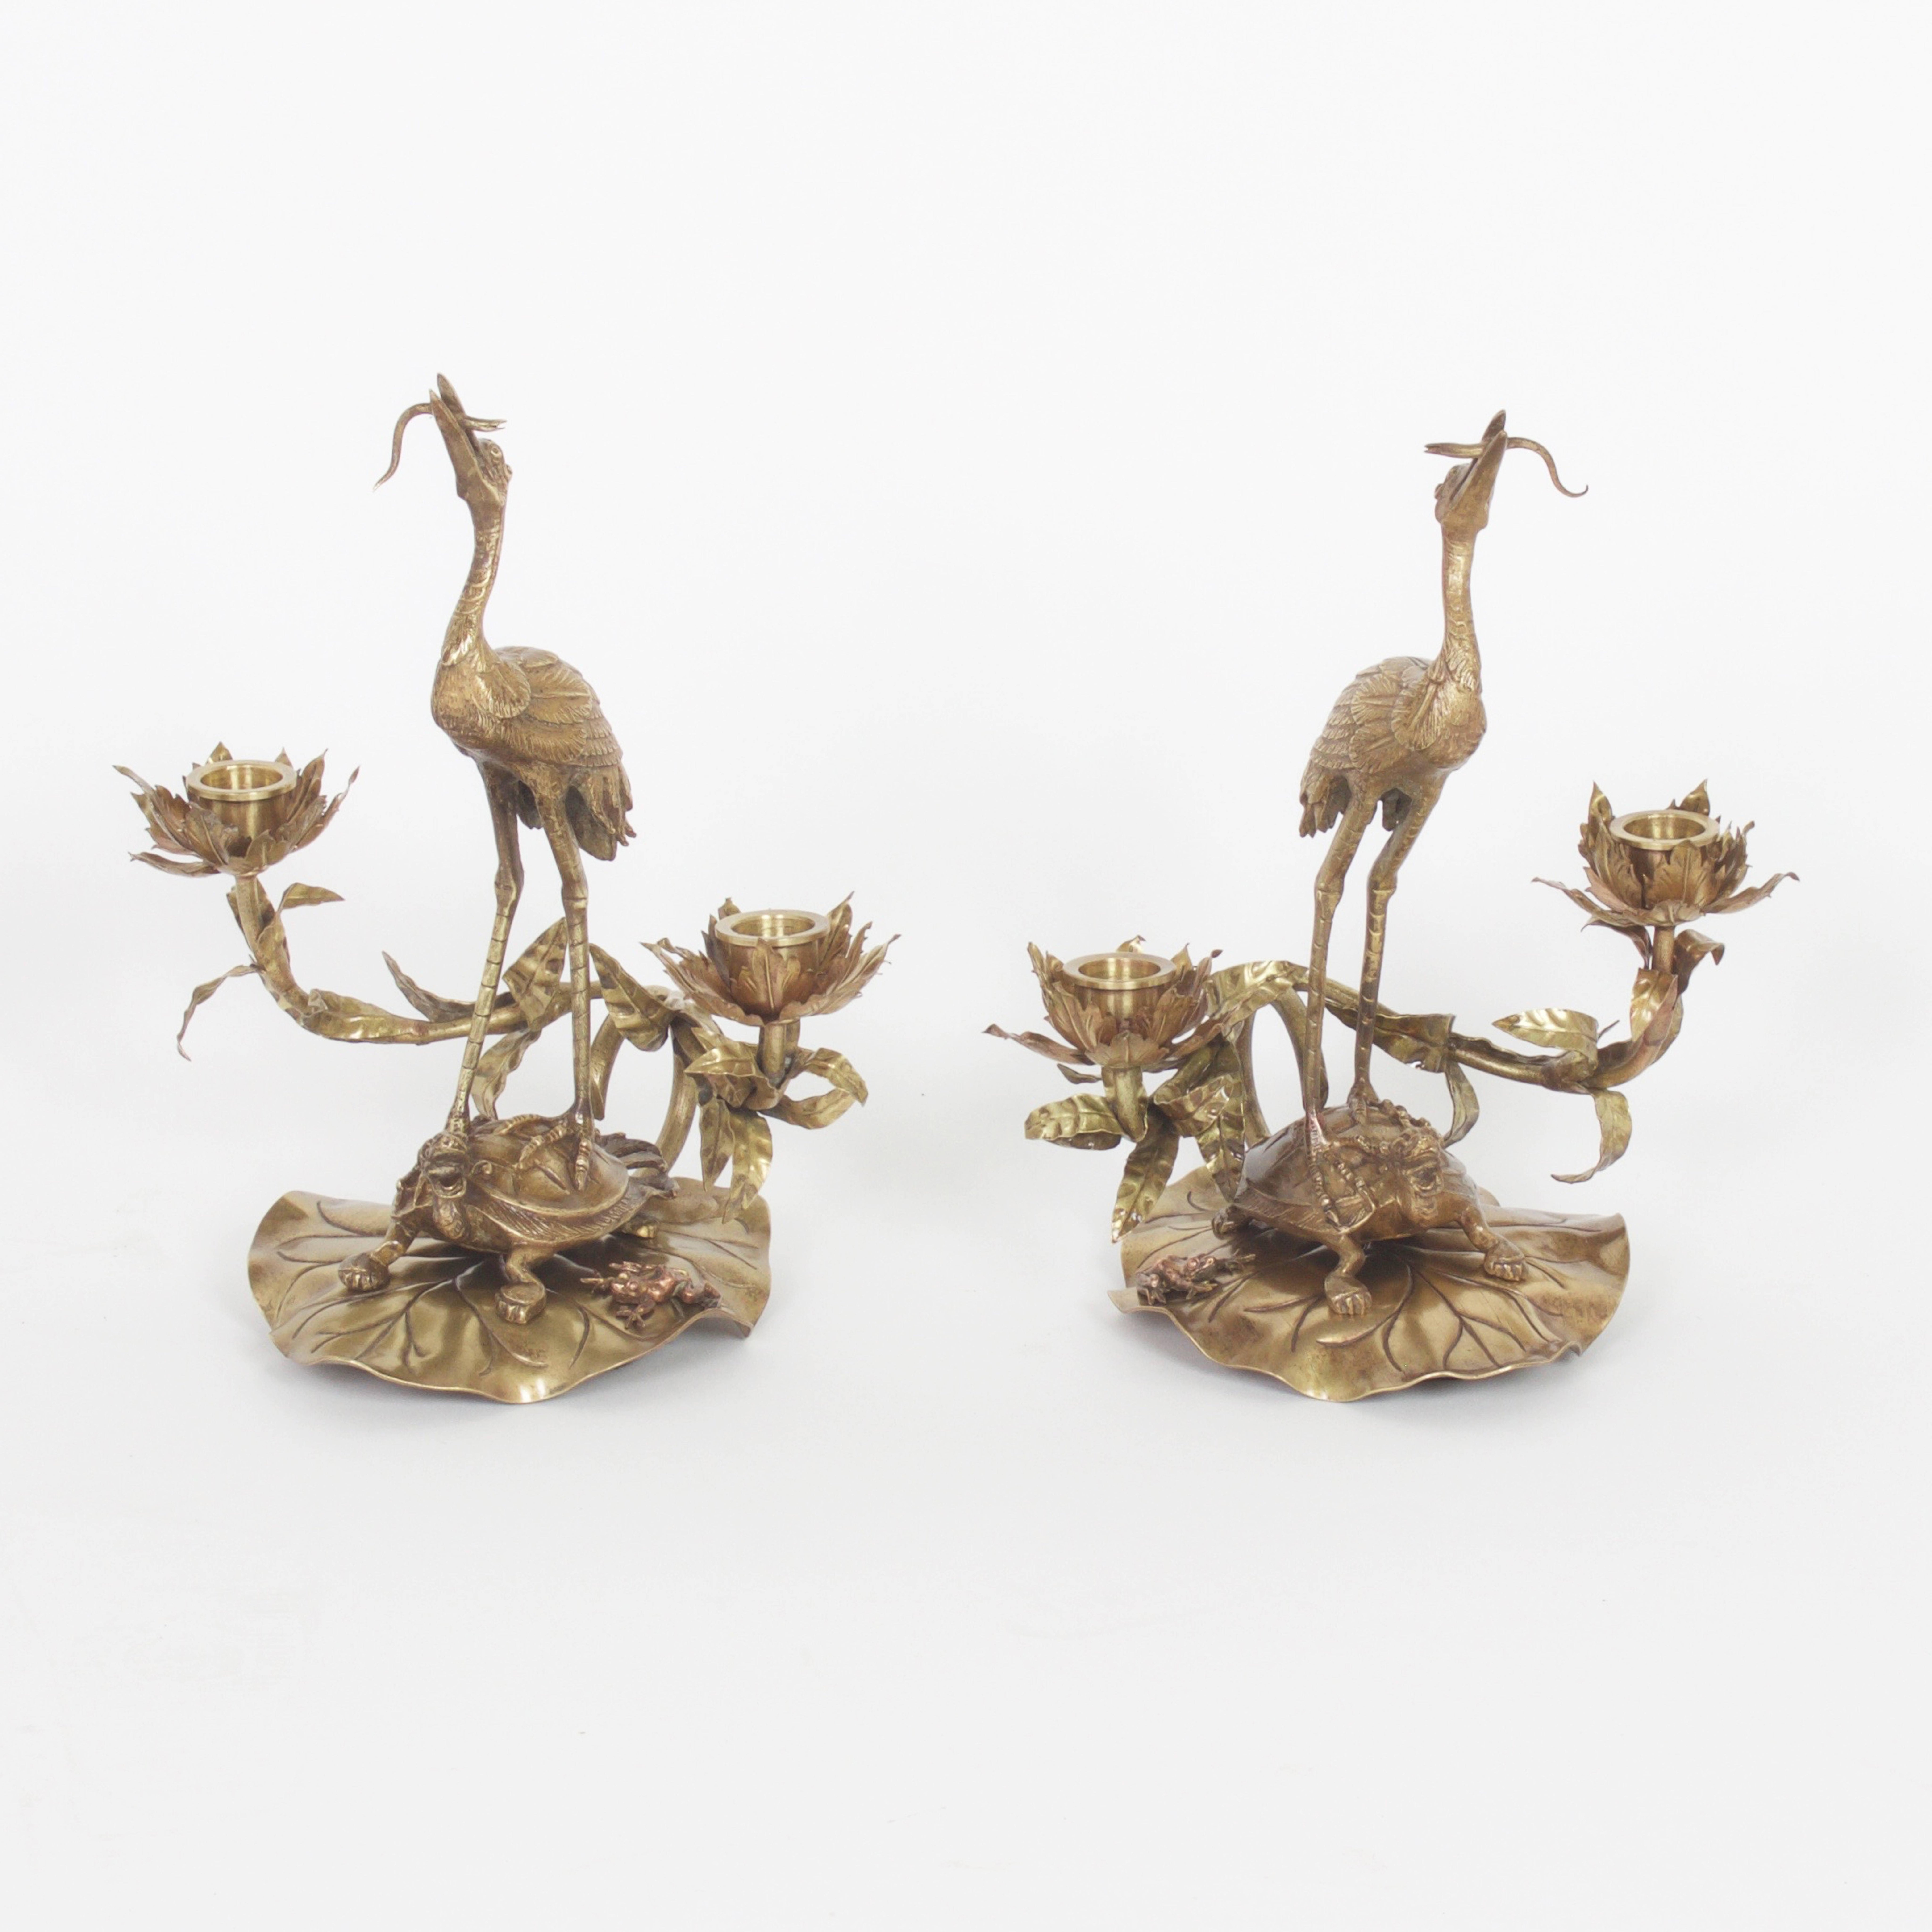 Pair of antique brass or bronze French naturalist fantasy candelabra or candle sticks with an age old chinoiserie composition depicting a crane or stork eating a snake while sitting on top of a tortoise or turtle on a lily pad, augmented with a